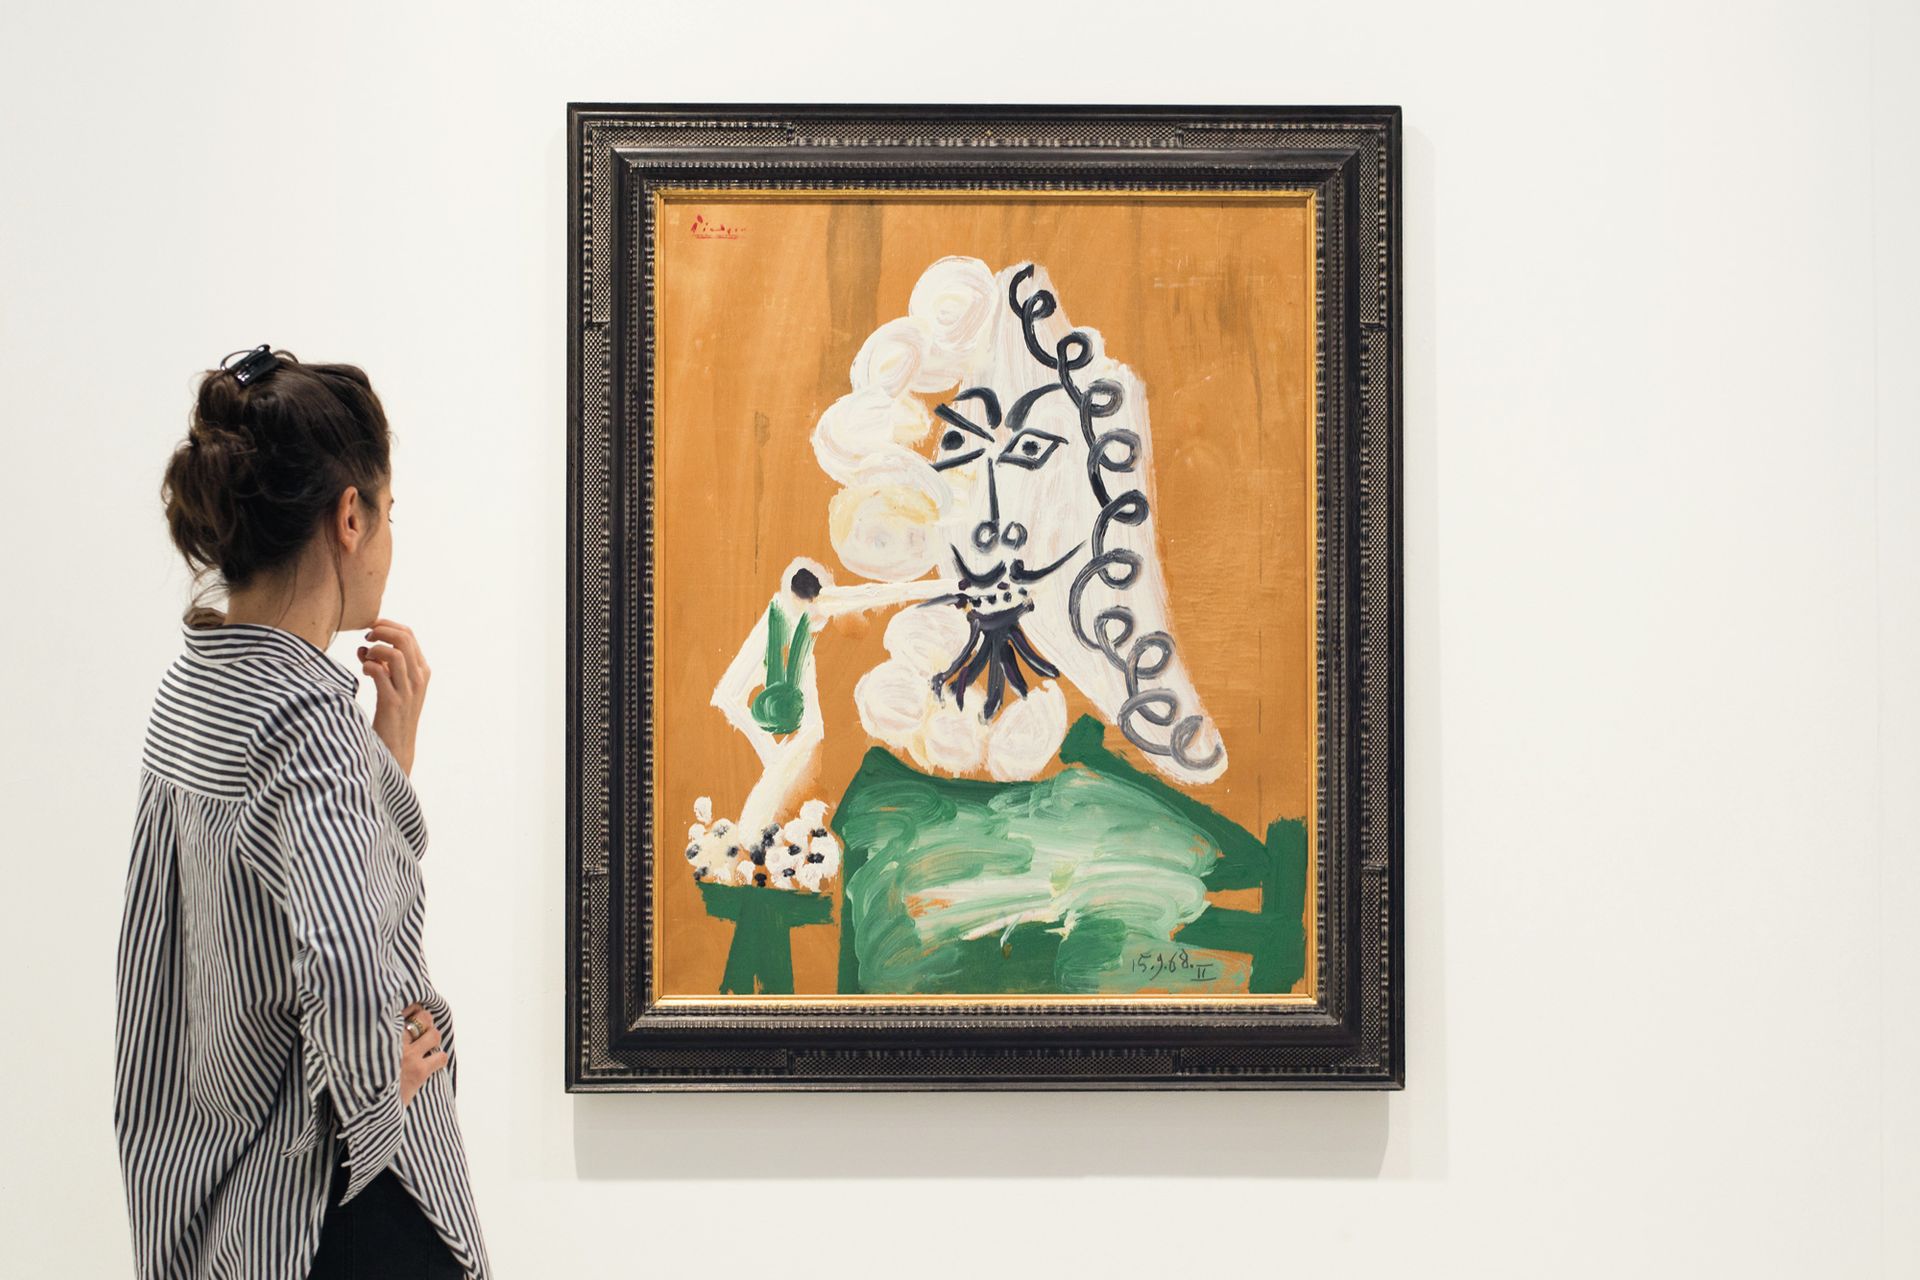 Pablo Picasso's Mousquetaire Buste (1968) is on sale at Mazzoleni gallery's stand at Art Basel in Hong Kong for $9.5m Liu Jingya